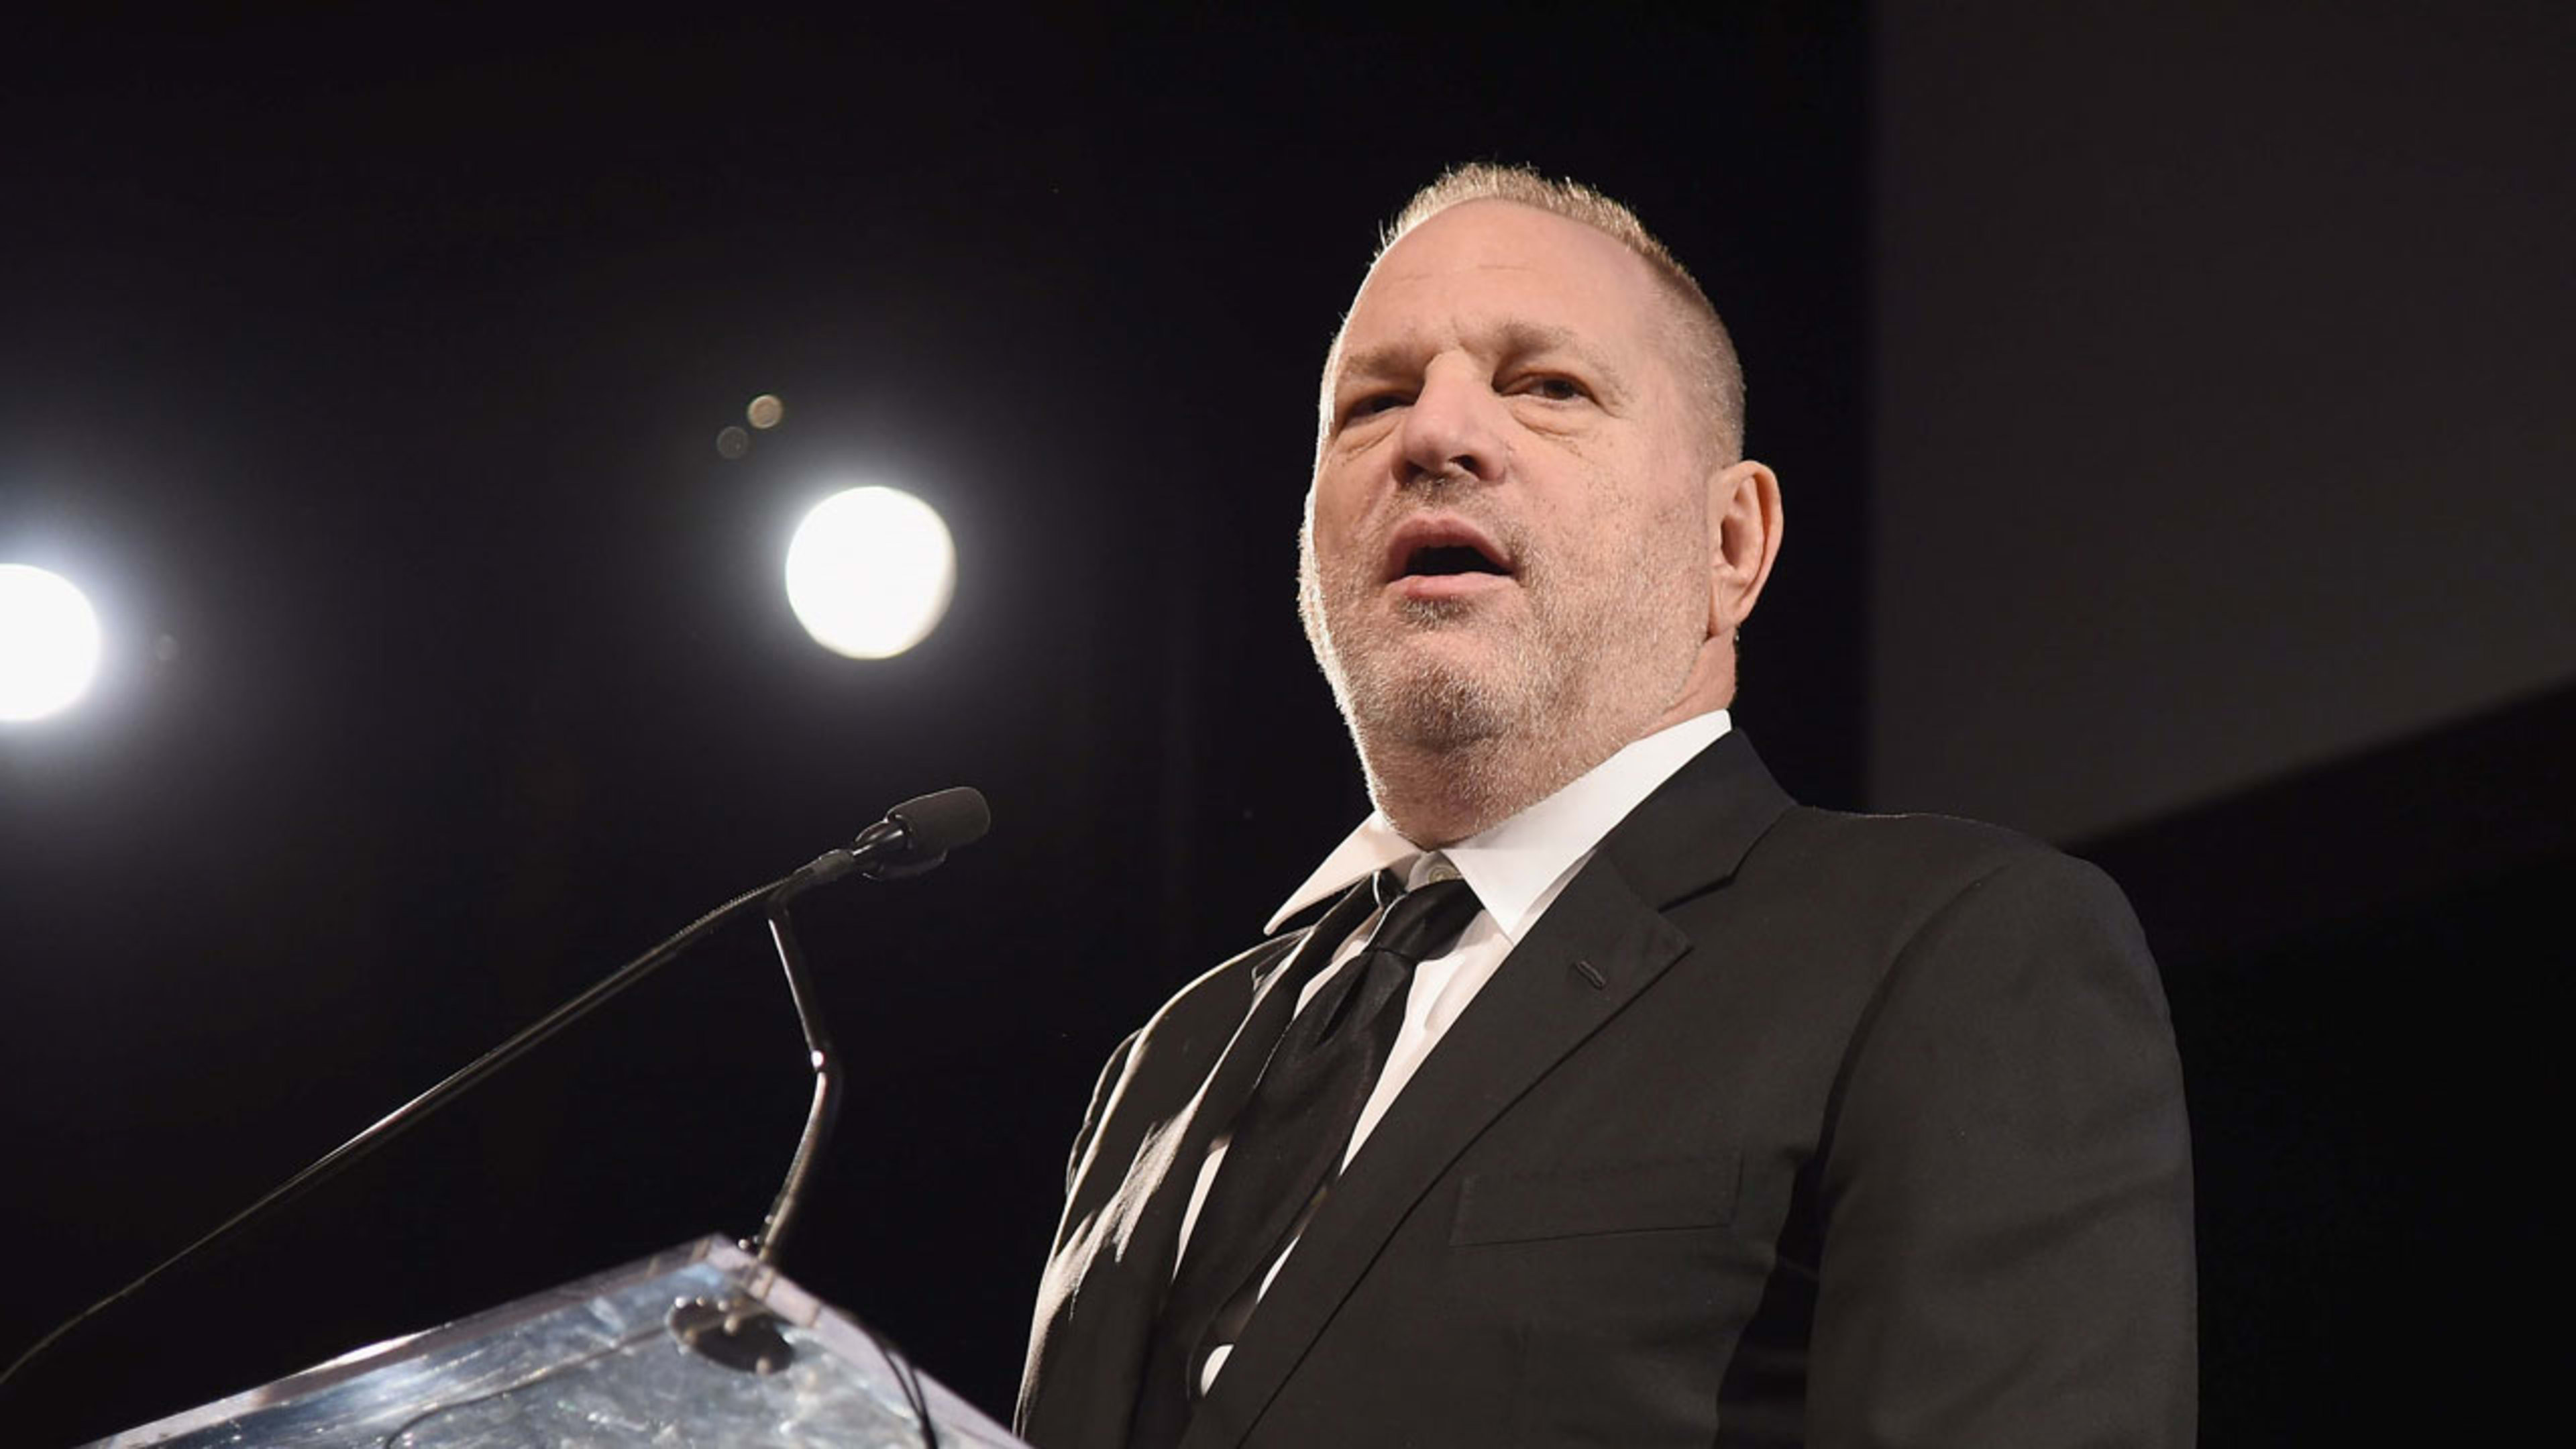 Harvey Weinstein is using the lawyer who brought down Gawker to sue the New York Times